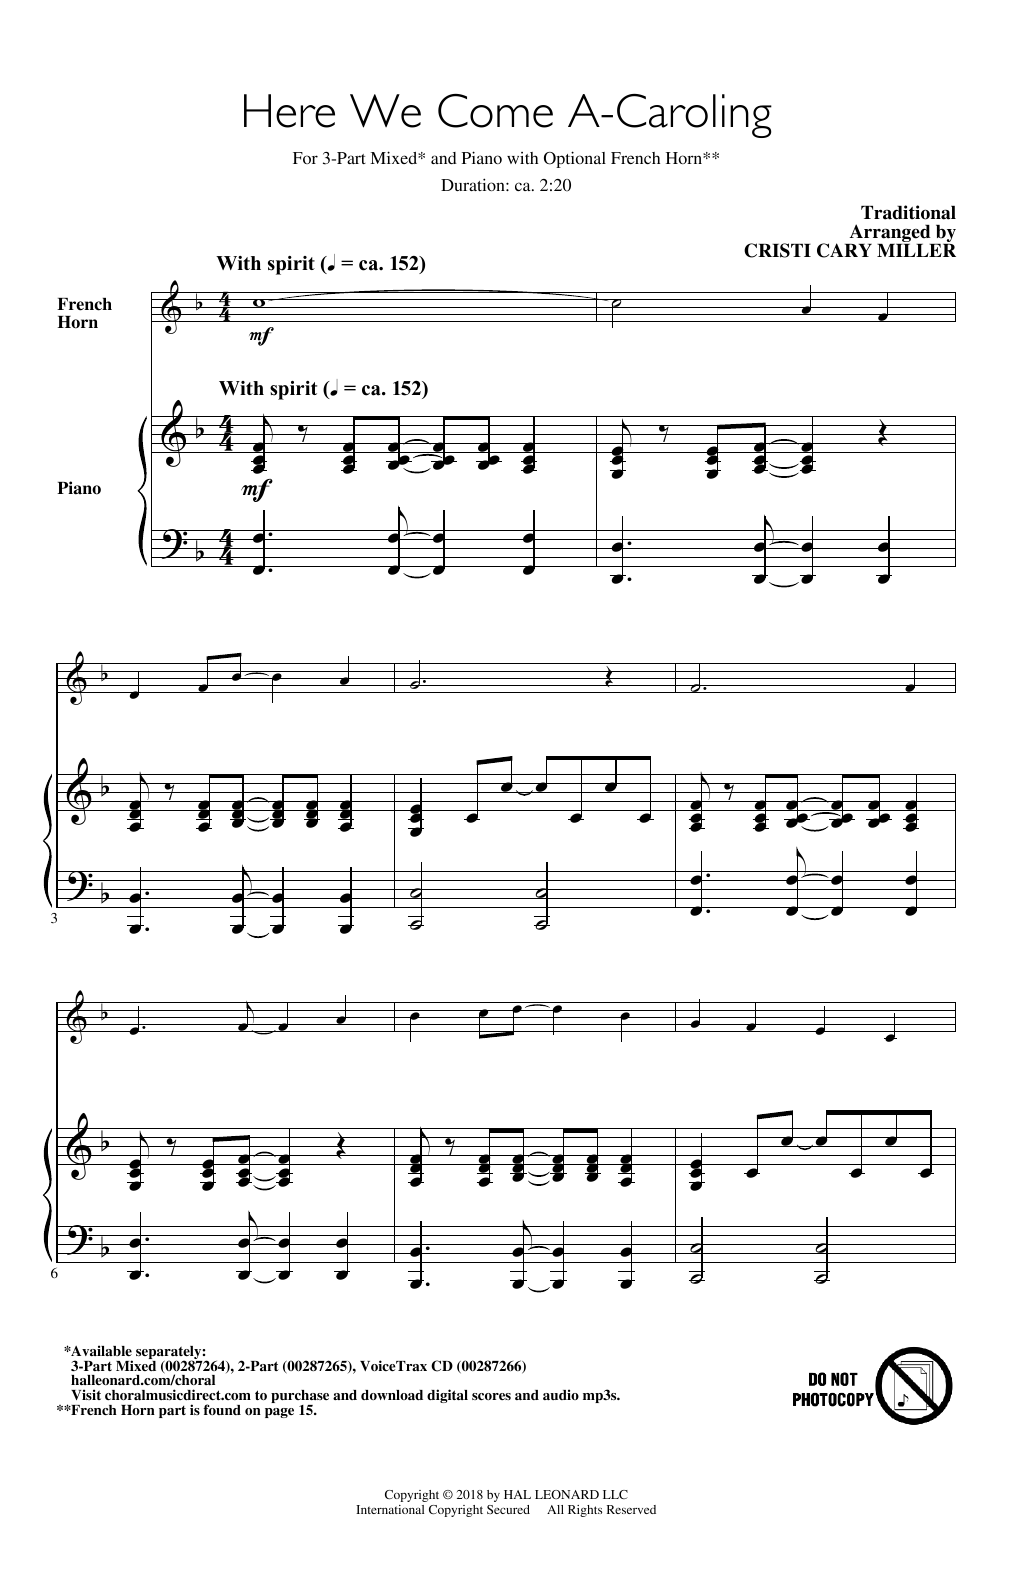 Download Cristi Cary Miller Here We Come A-Caroling Sheet Music